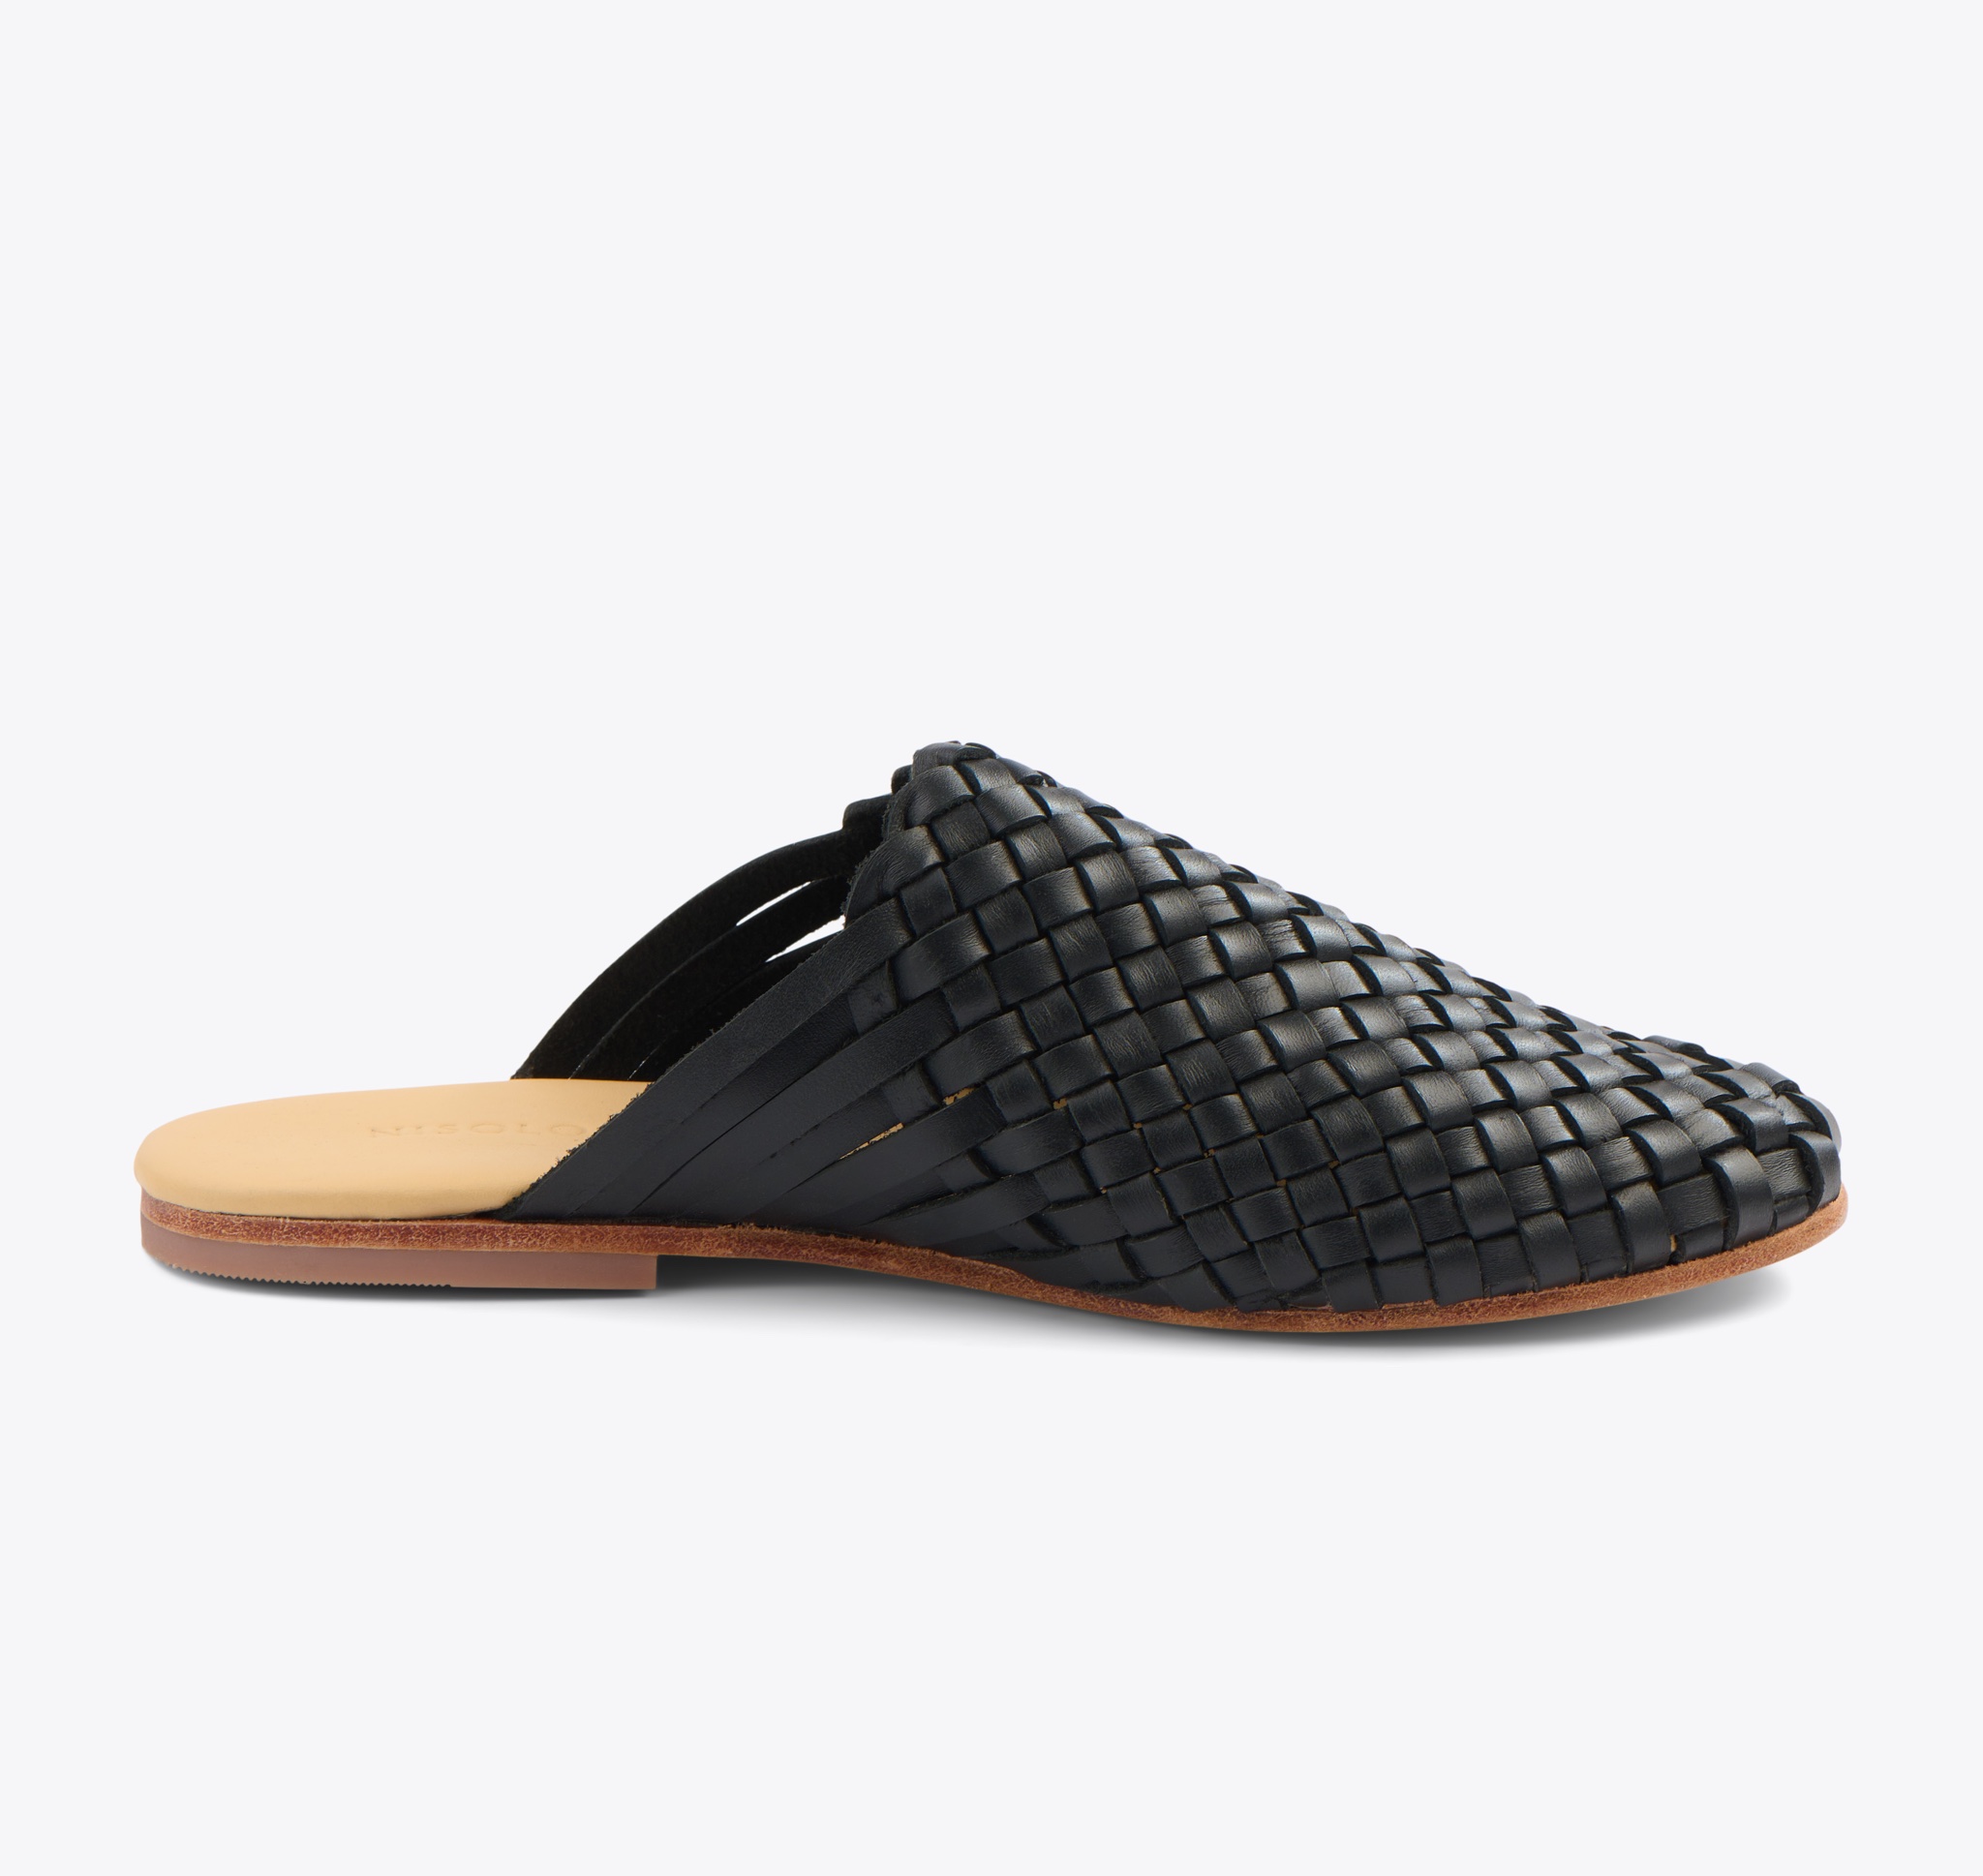 Nisolo Go-To Woven Slip On Woven Black - Every Nisolo product is built on the foundation of comfort, function, and design. 